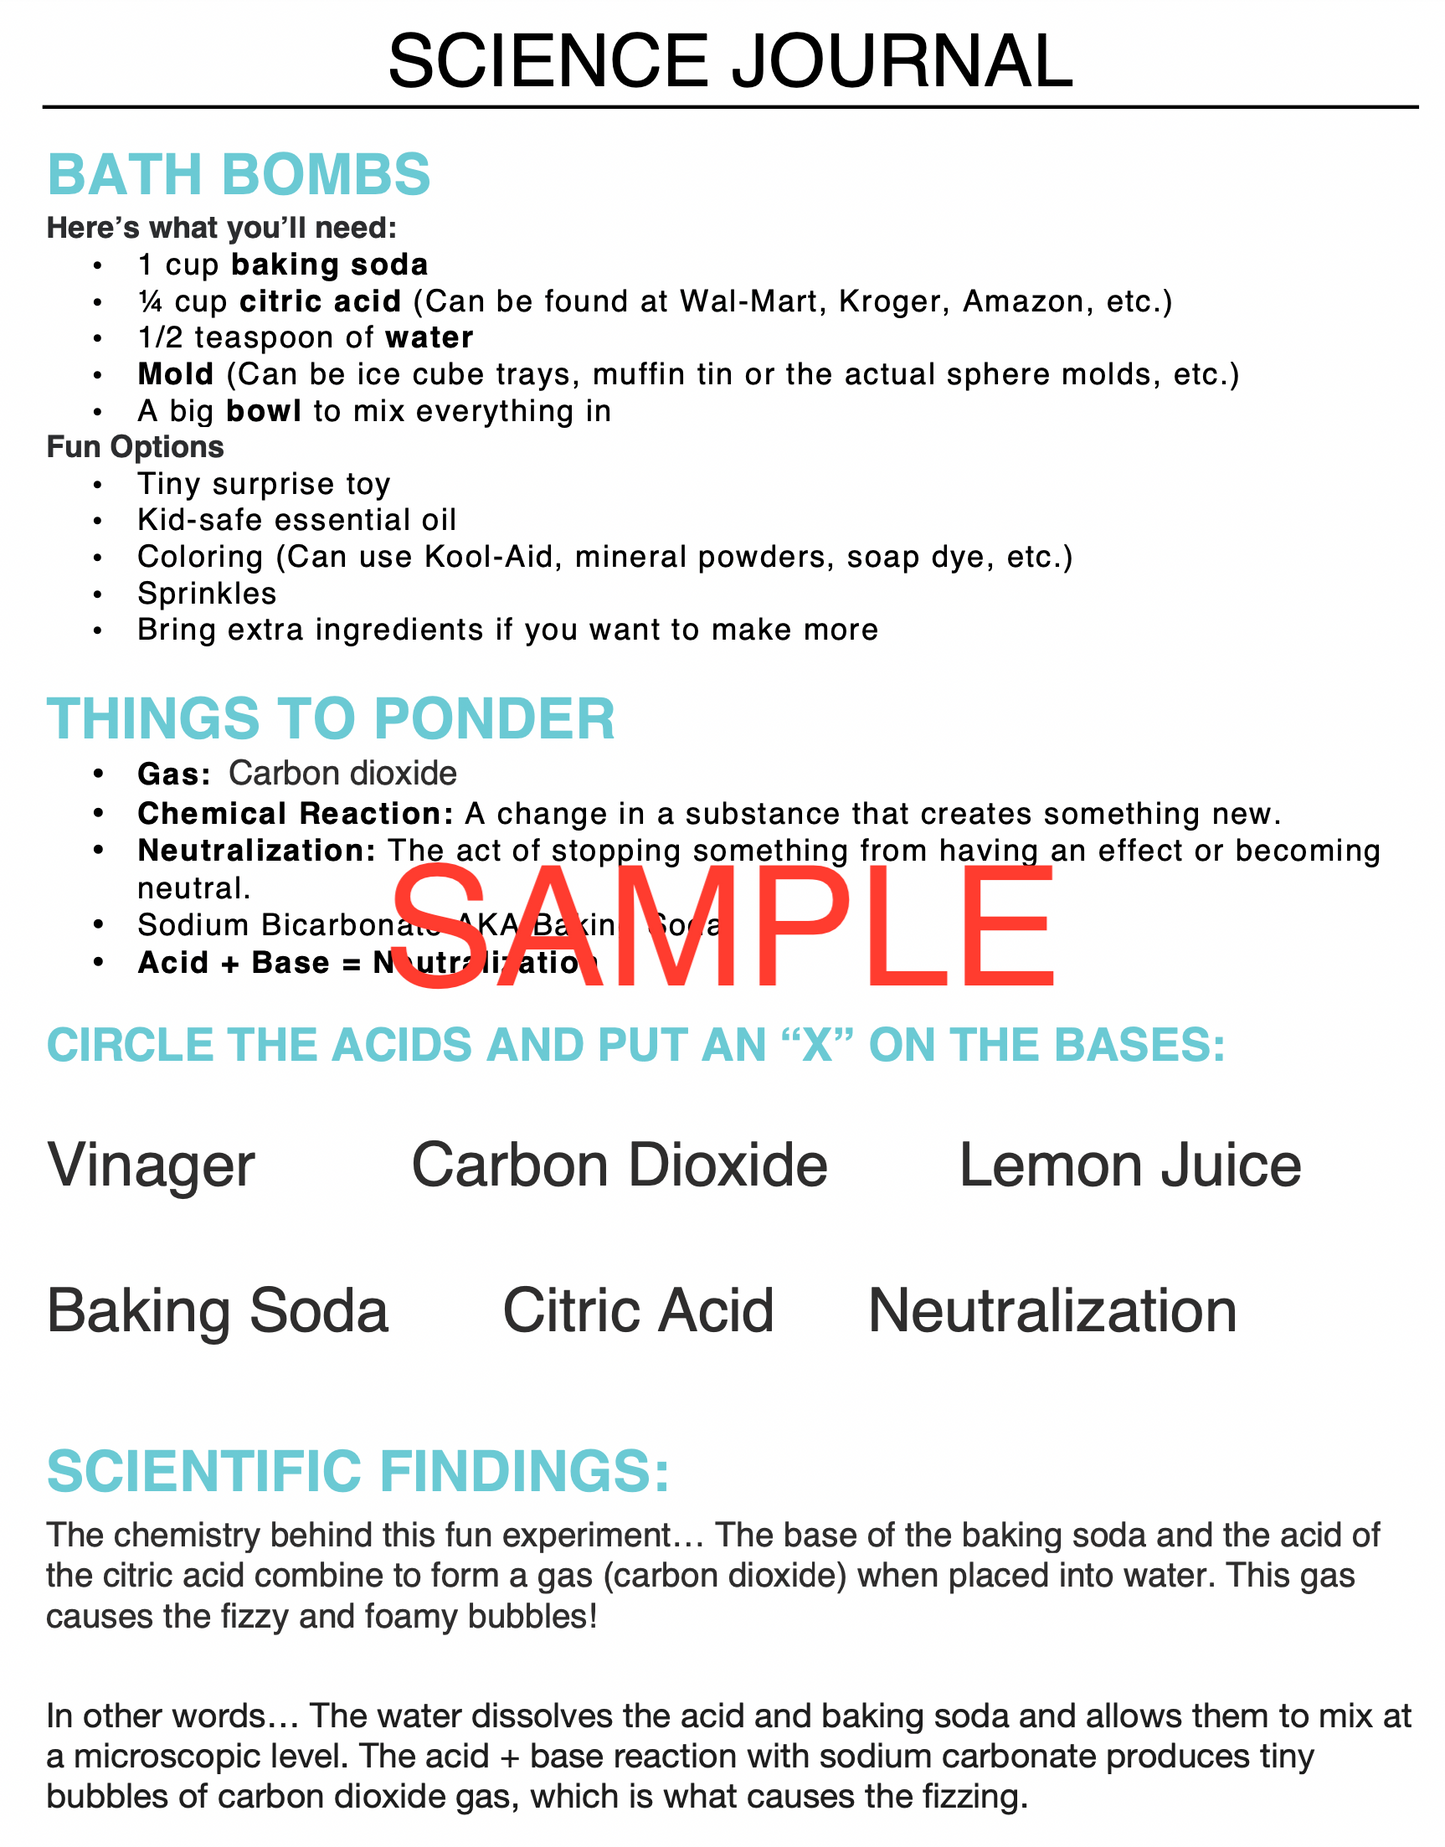 Chemistry Behind Bath Bombs Science Experiment Journal & Step-By-Step Instructions